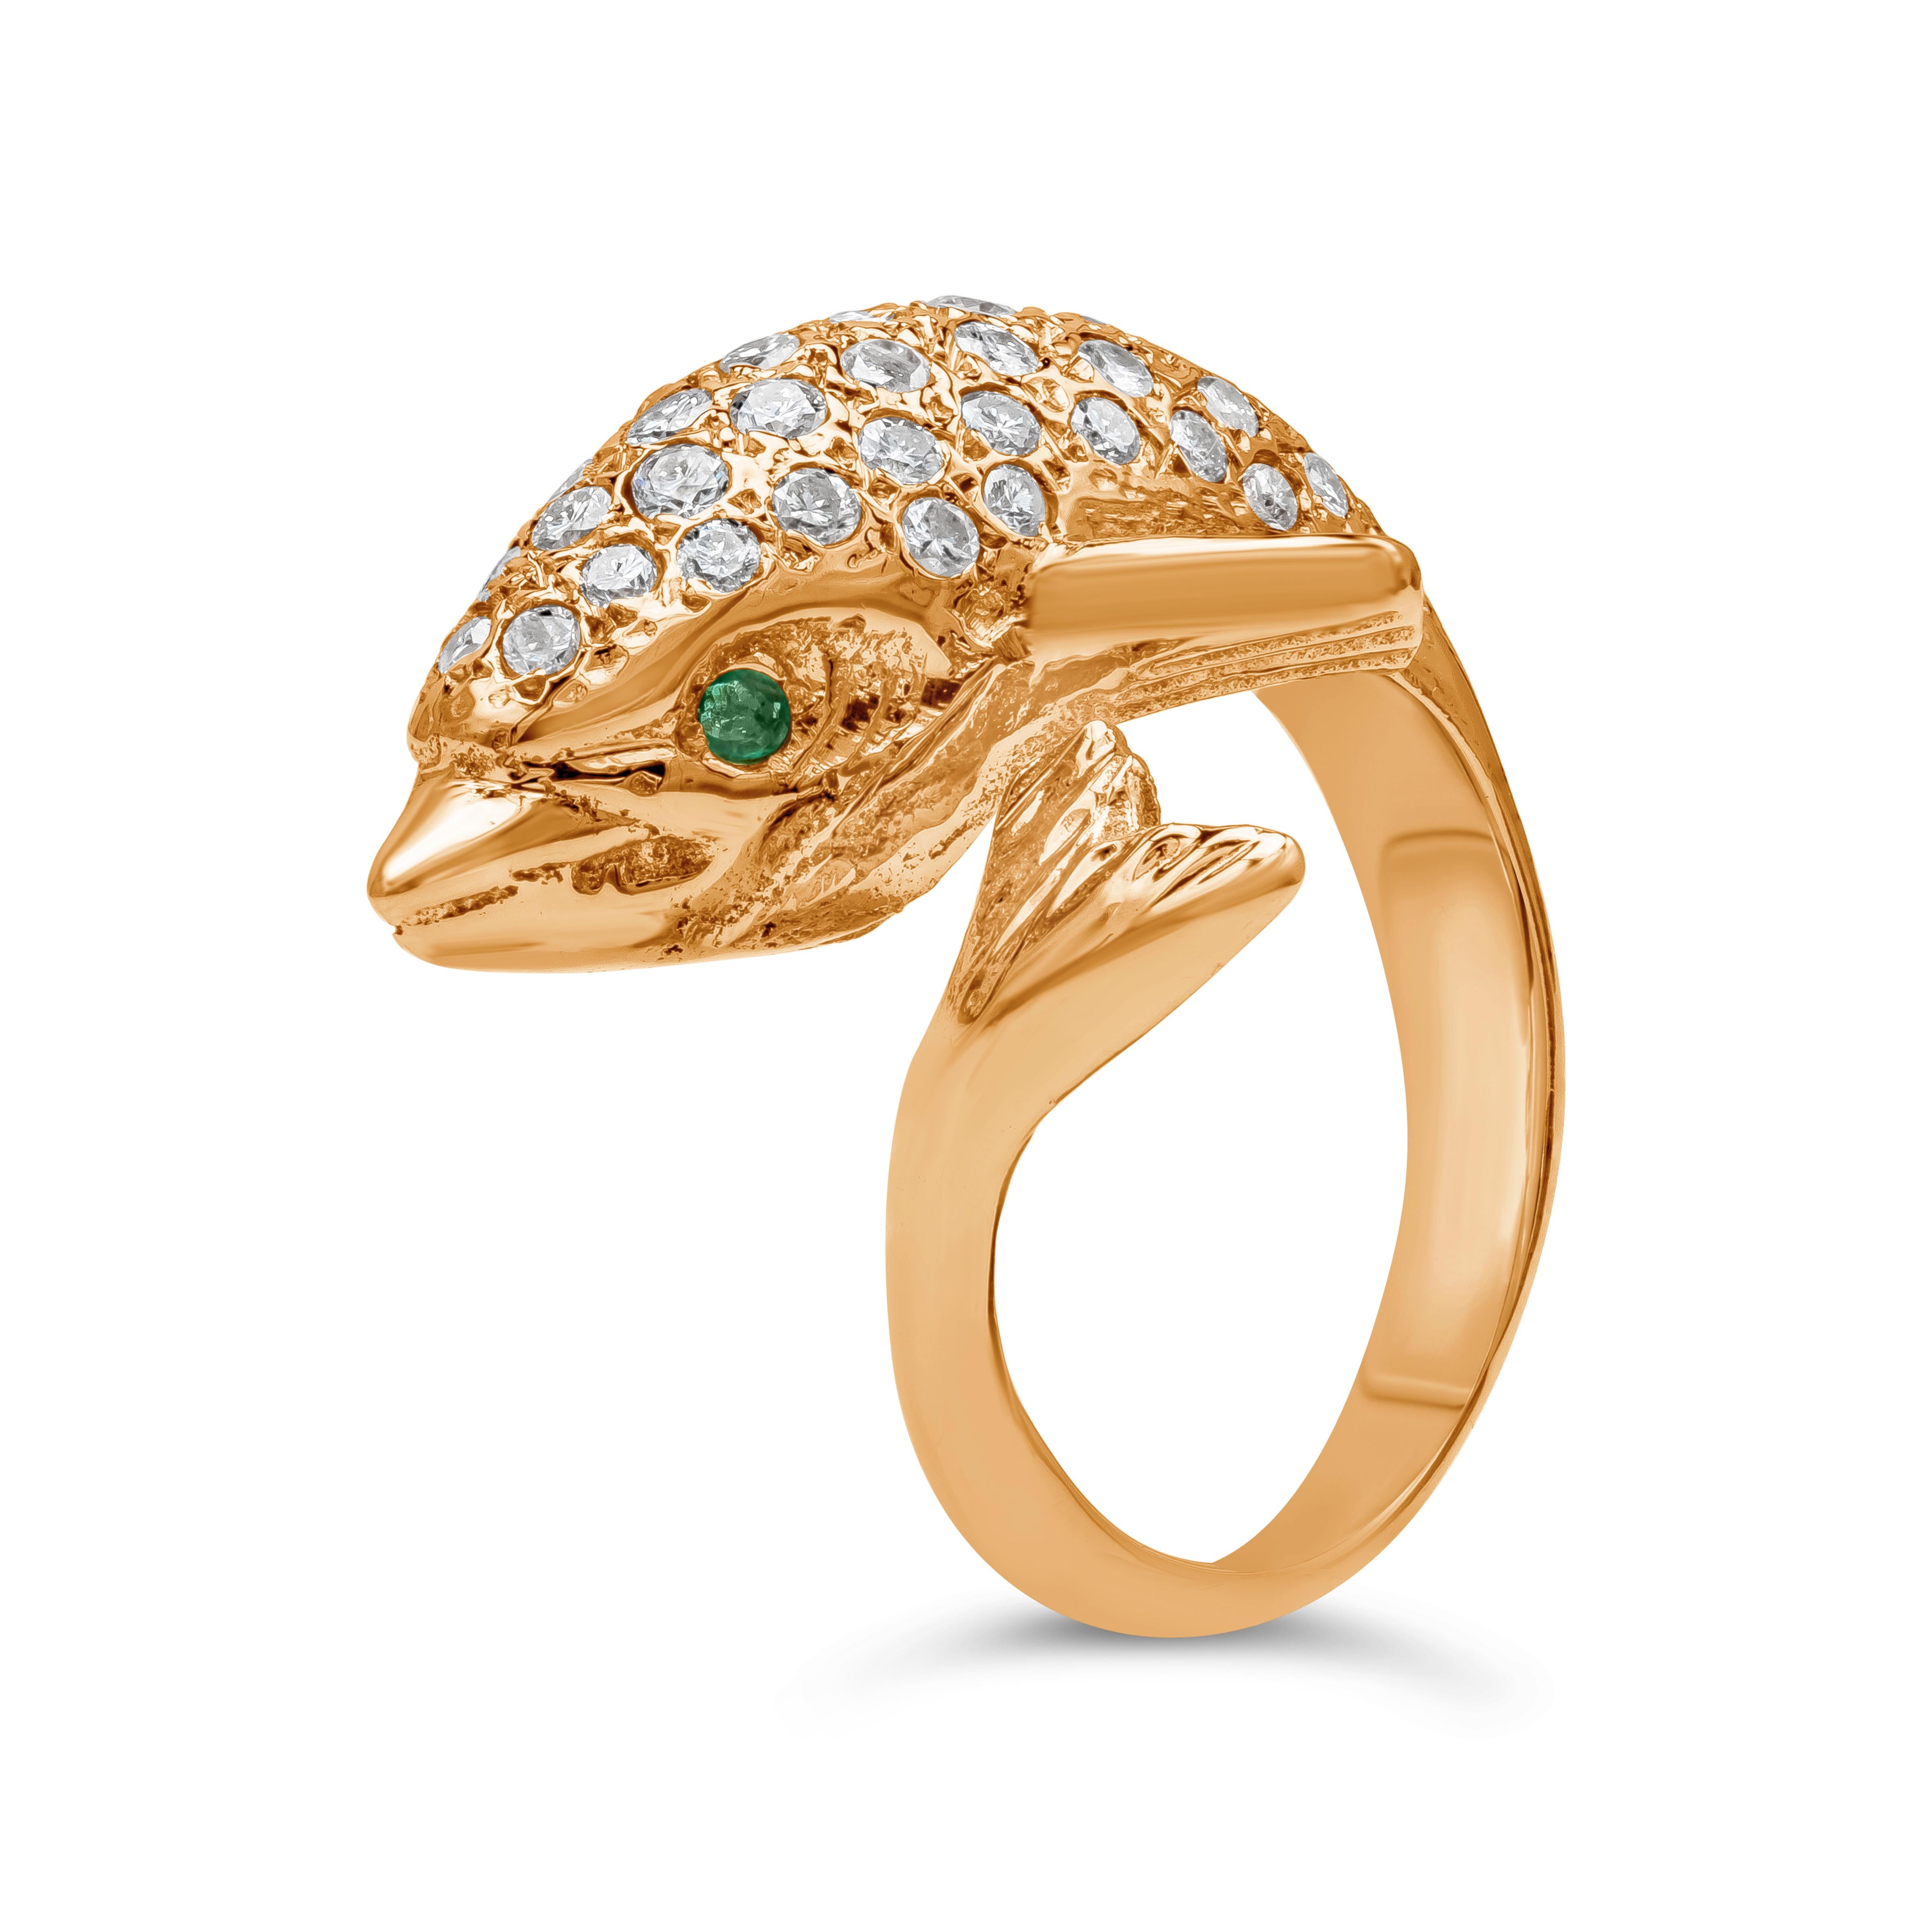 A beautiful and fashionable ring showcasing a dolphin that elegantly wraps around the finger. Set with round brilliant diamonds and green emeralds as the eyes of the dolphin. Made in 14k yellow gold.